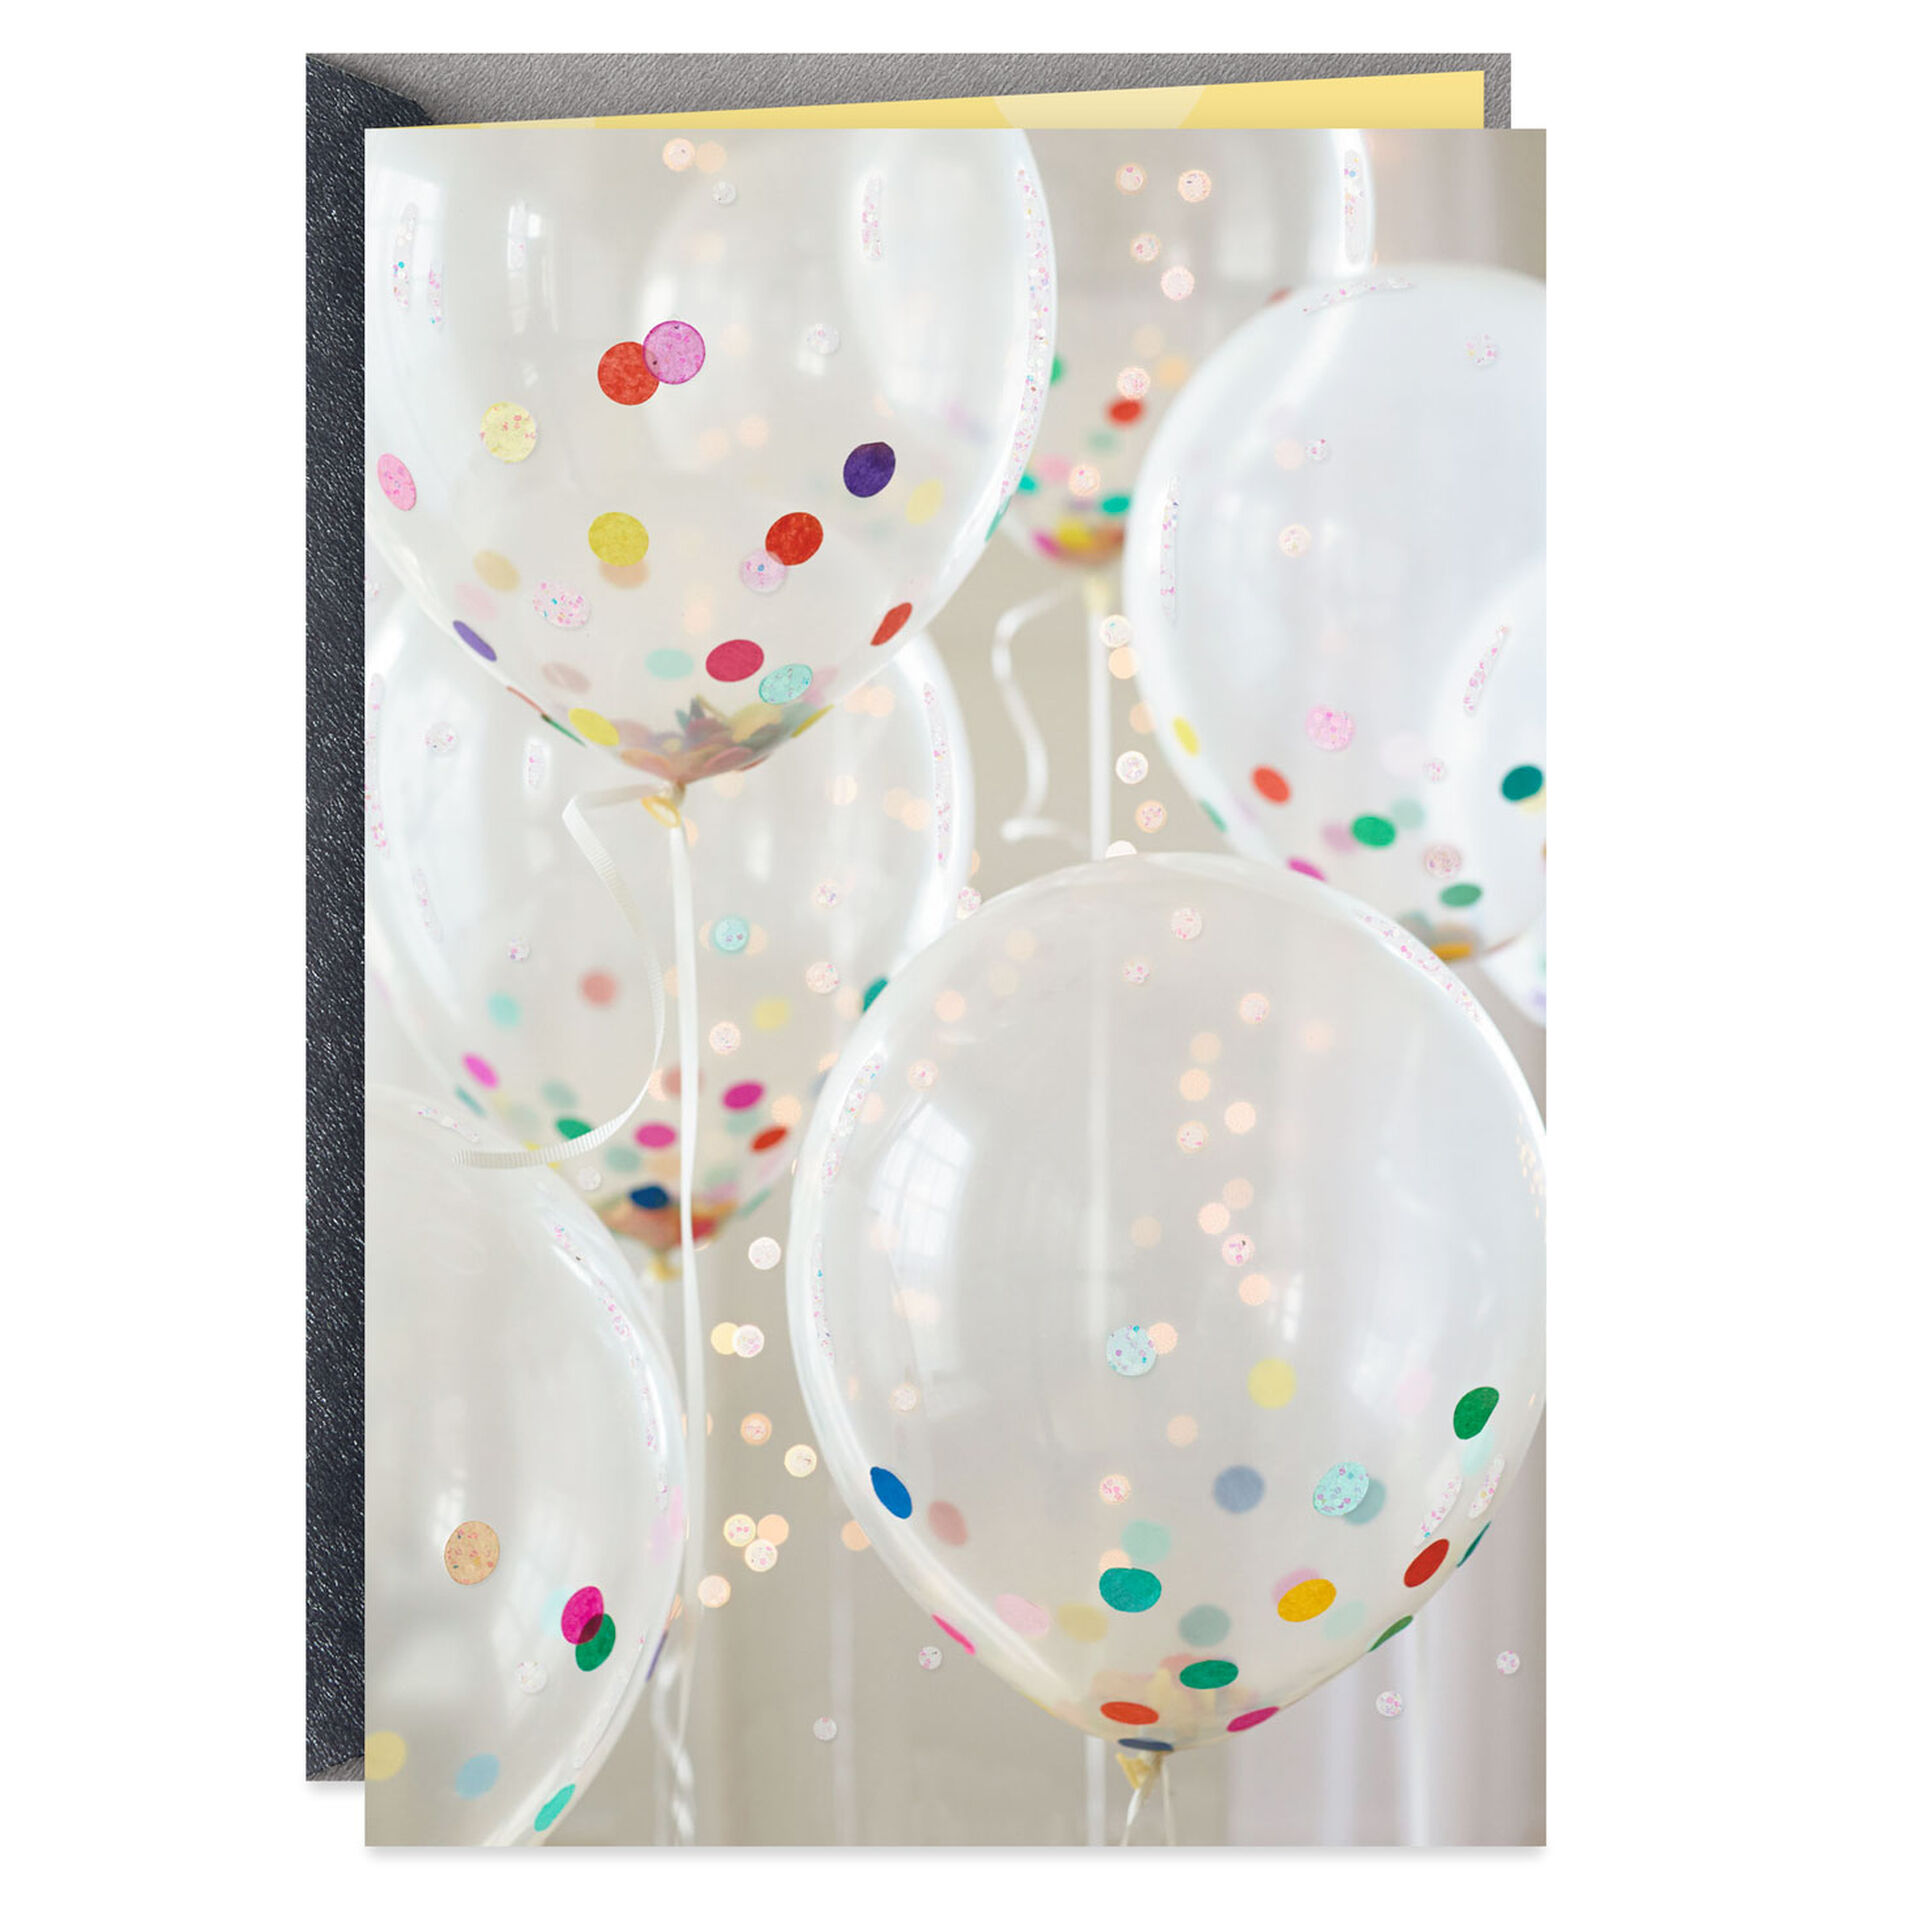 Balloons-Filled-With-Confetti-Blank-Card_299IMP1480_01